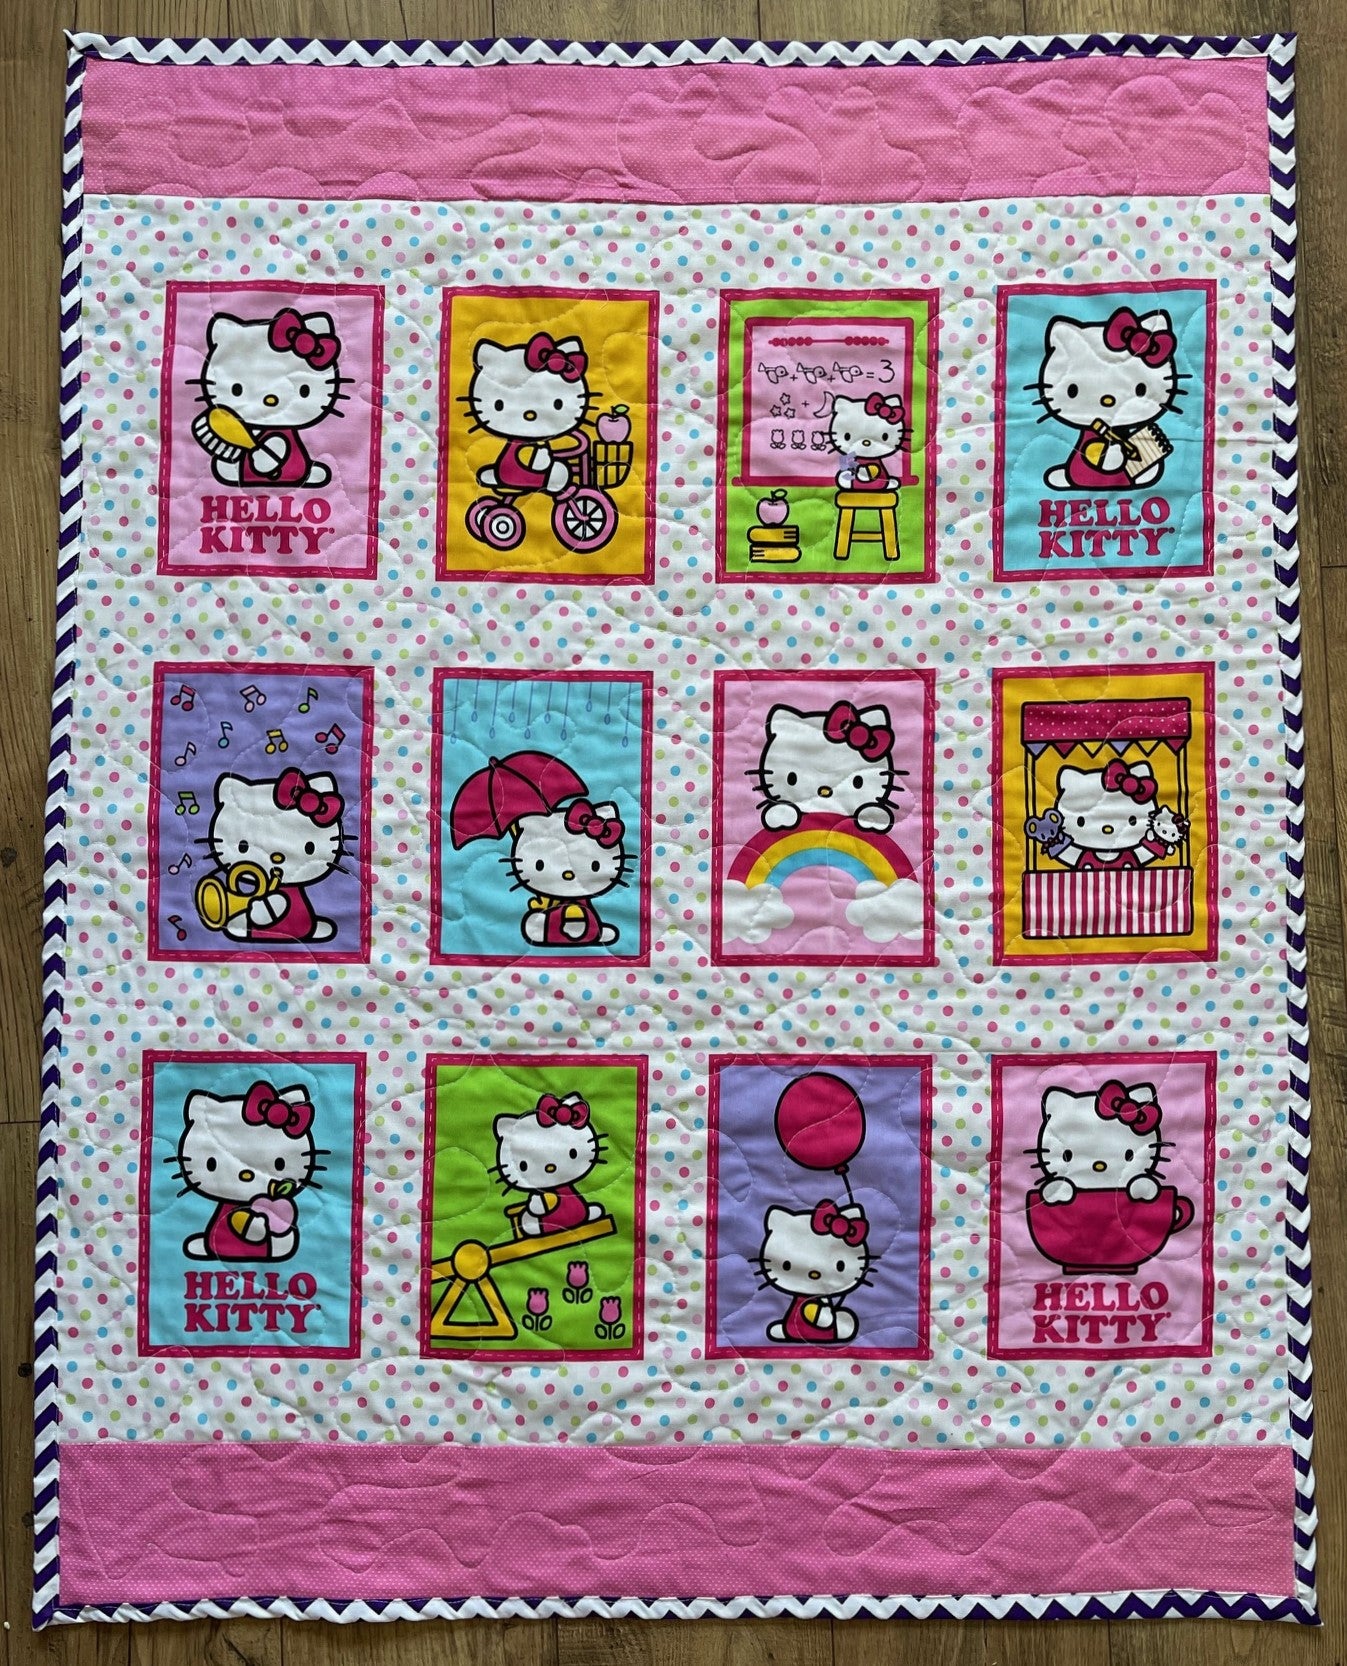 HELLO KITTY STORY BLOCKS INSPIRED QUILTED BLANKET 1 AVAILABLE